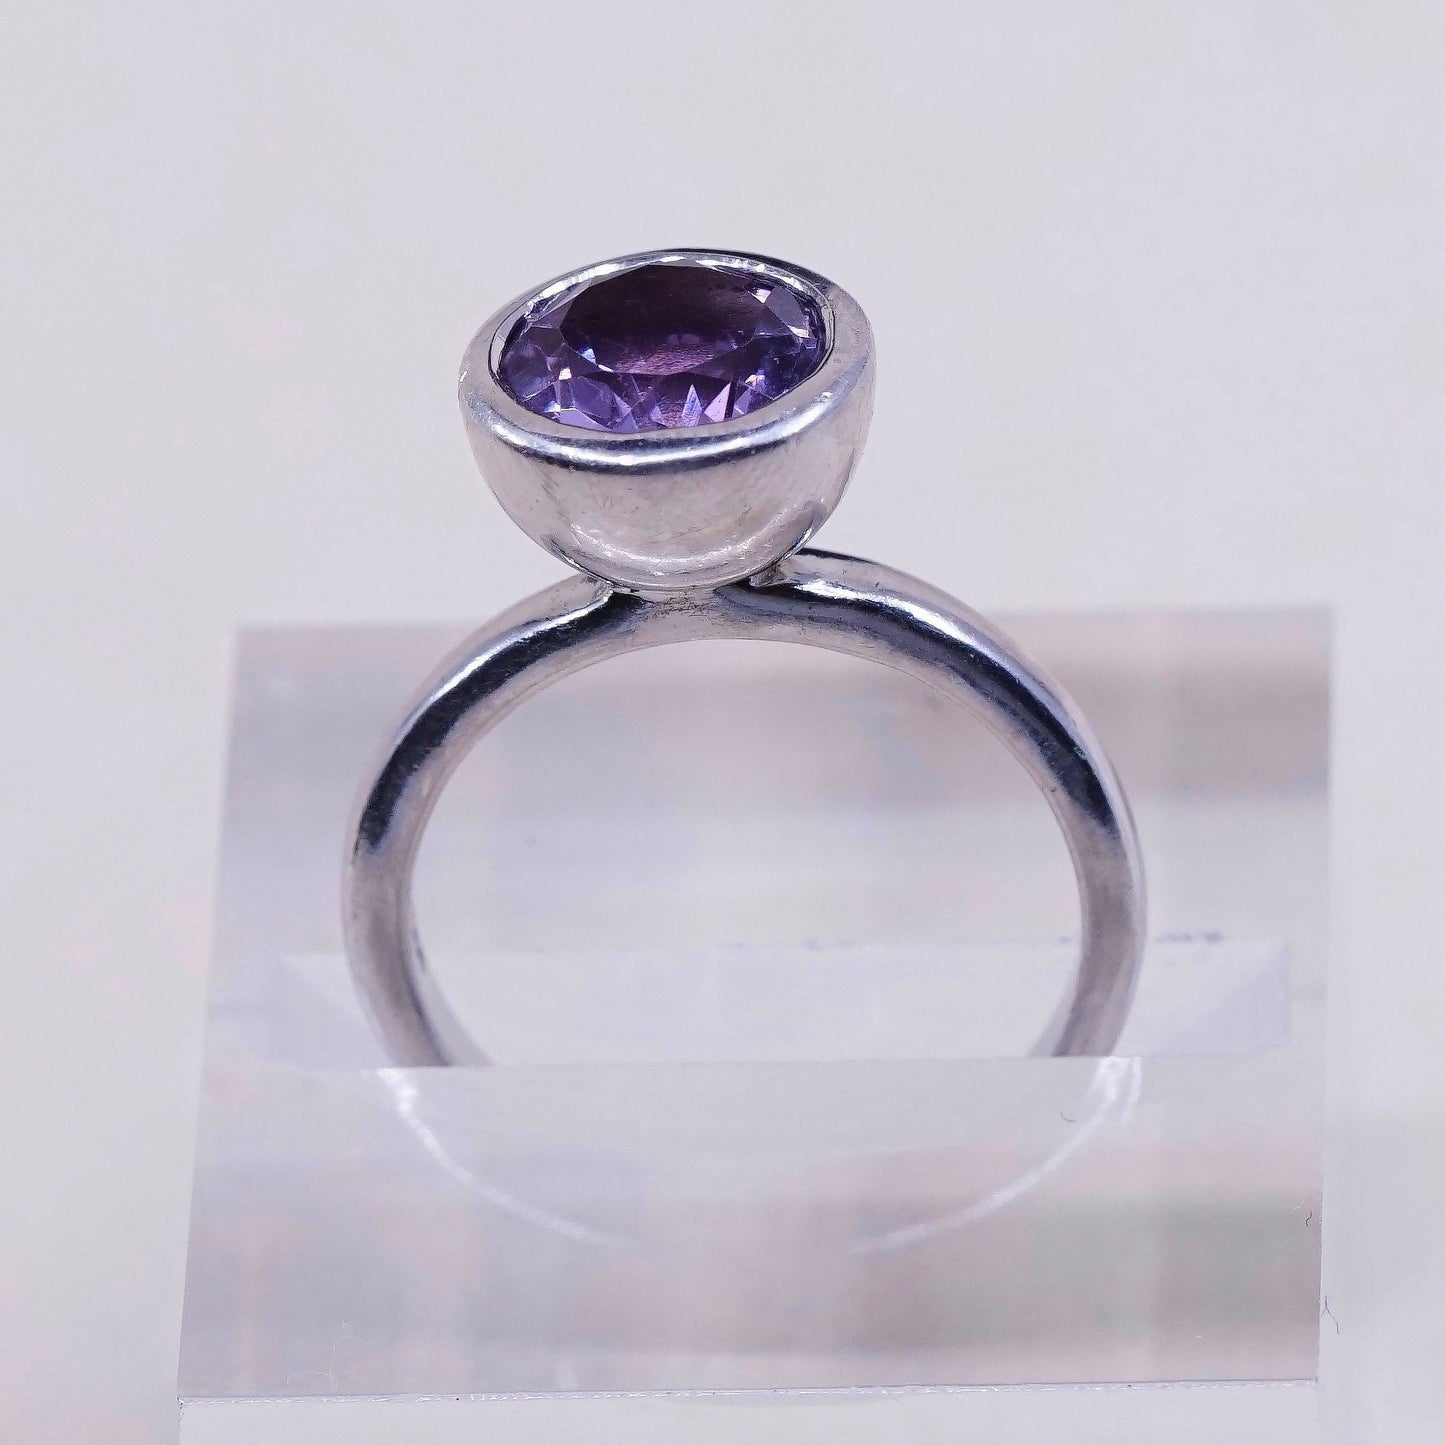 Size 7, vintage J&T Sterling silver handmade cocktail ring, 925 with amethyst